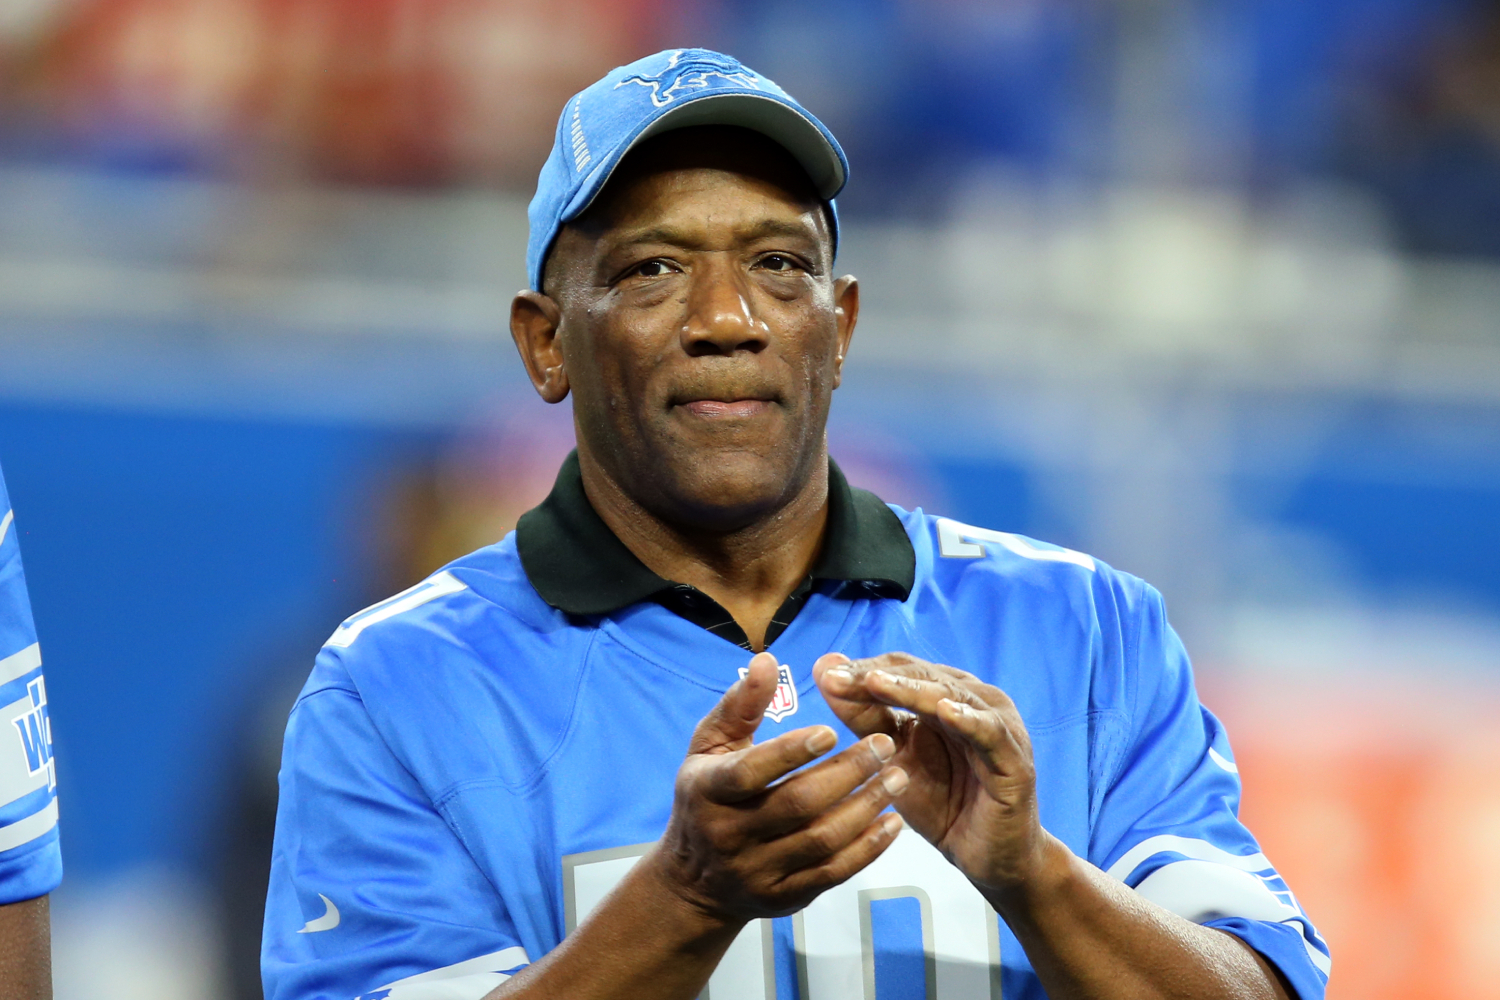 Billy Sims being honored at halftime of a Lions game